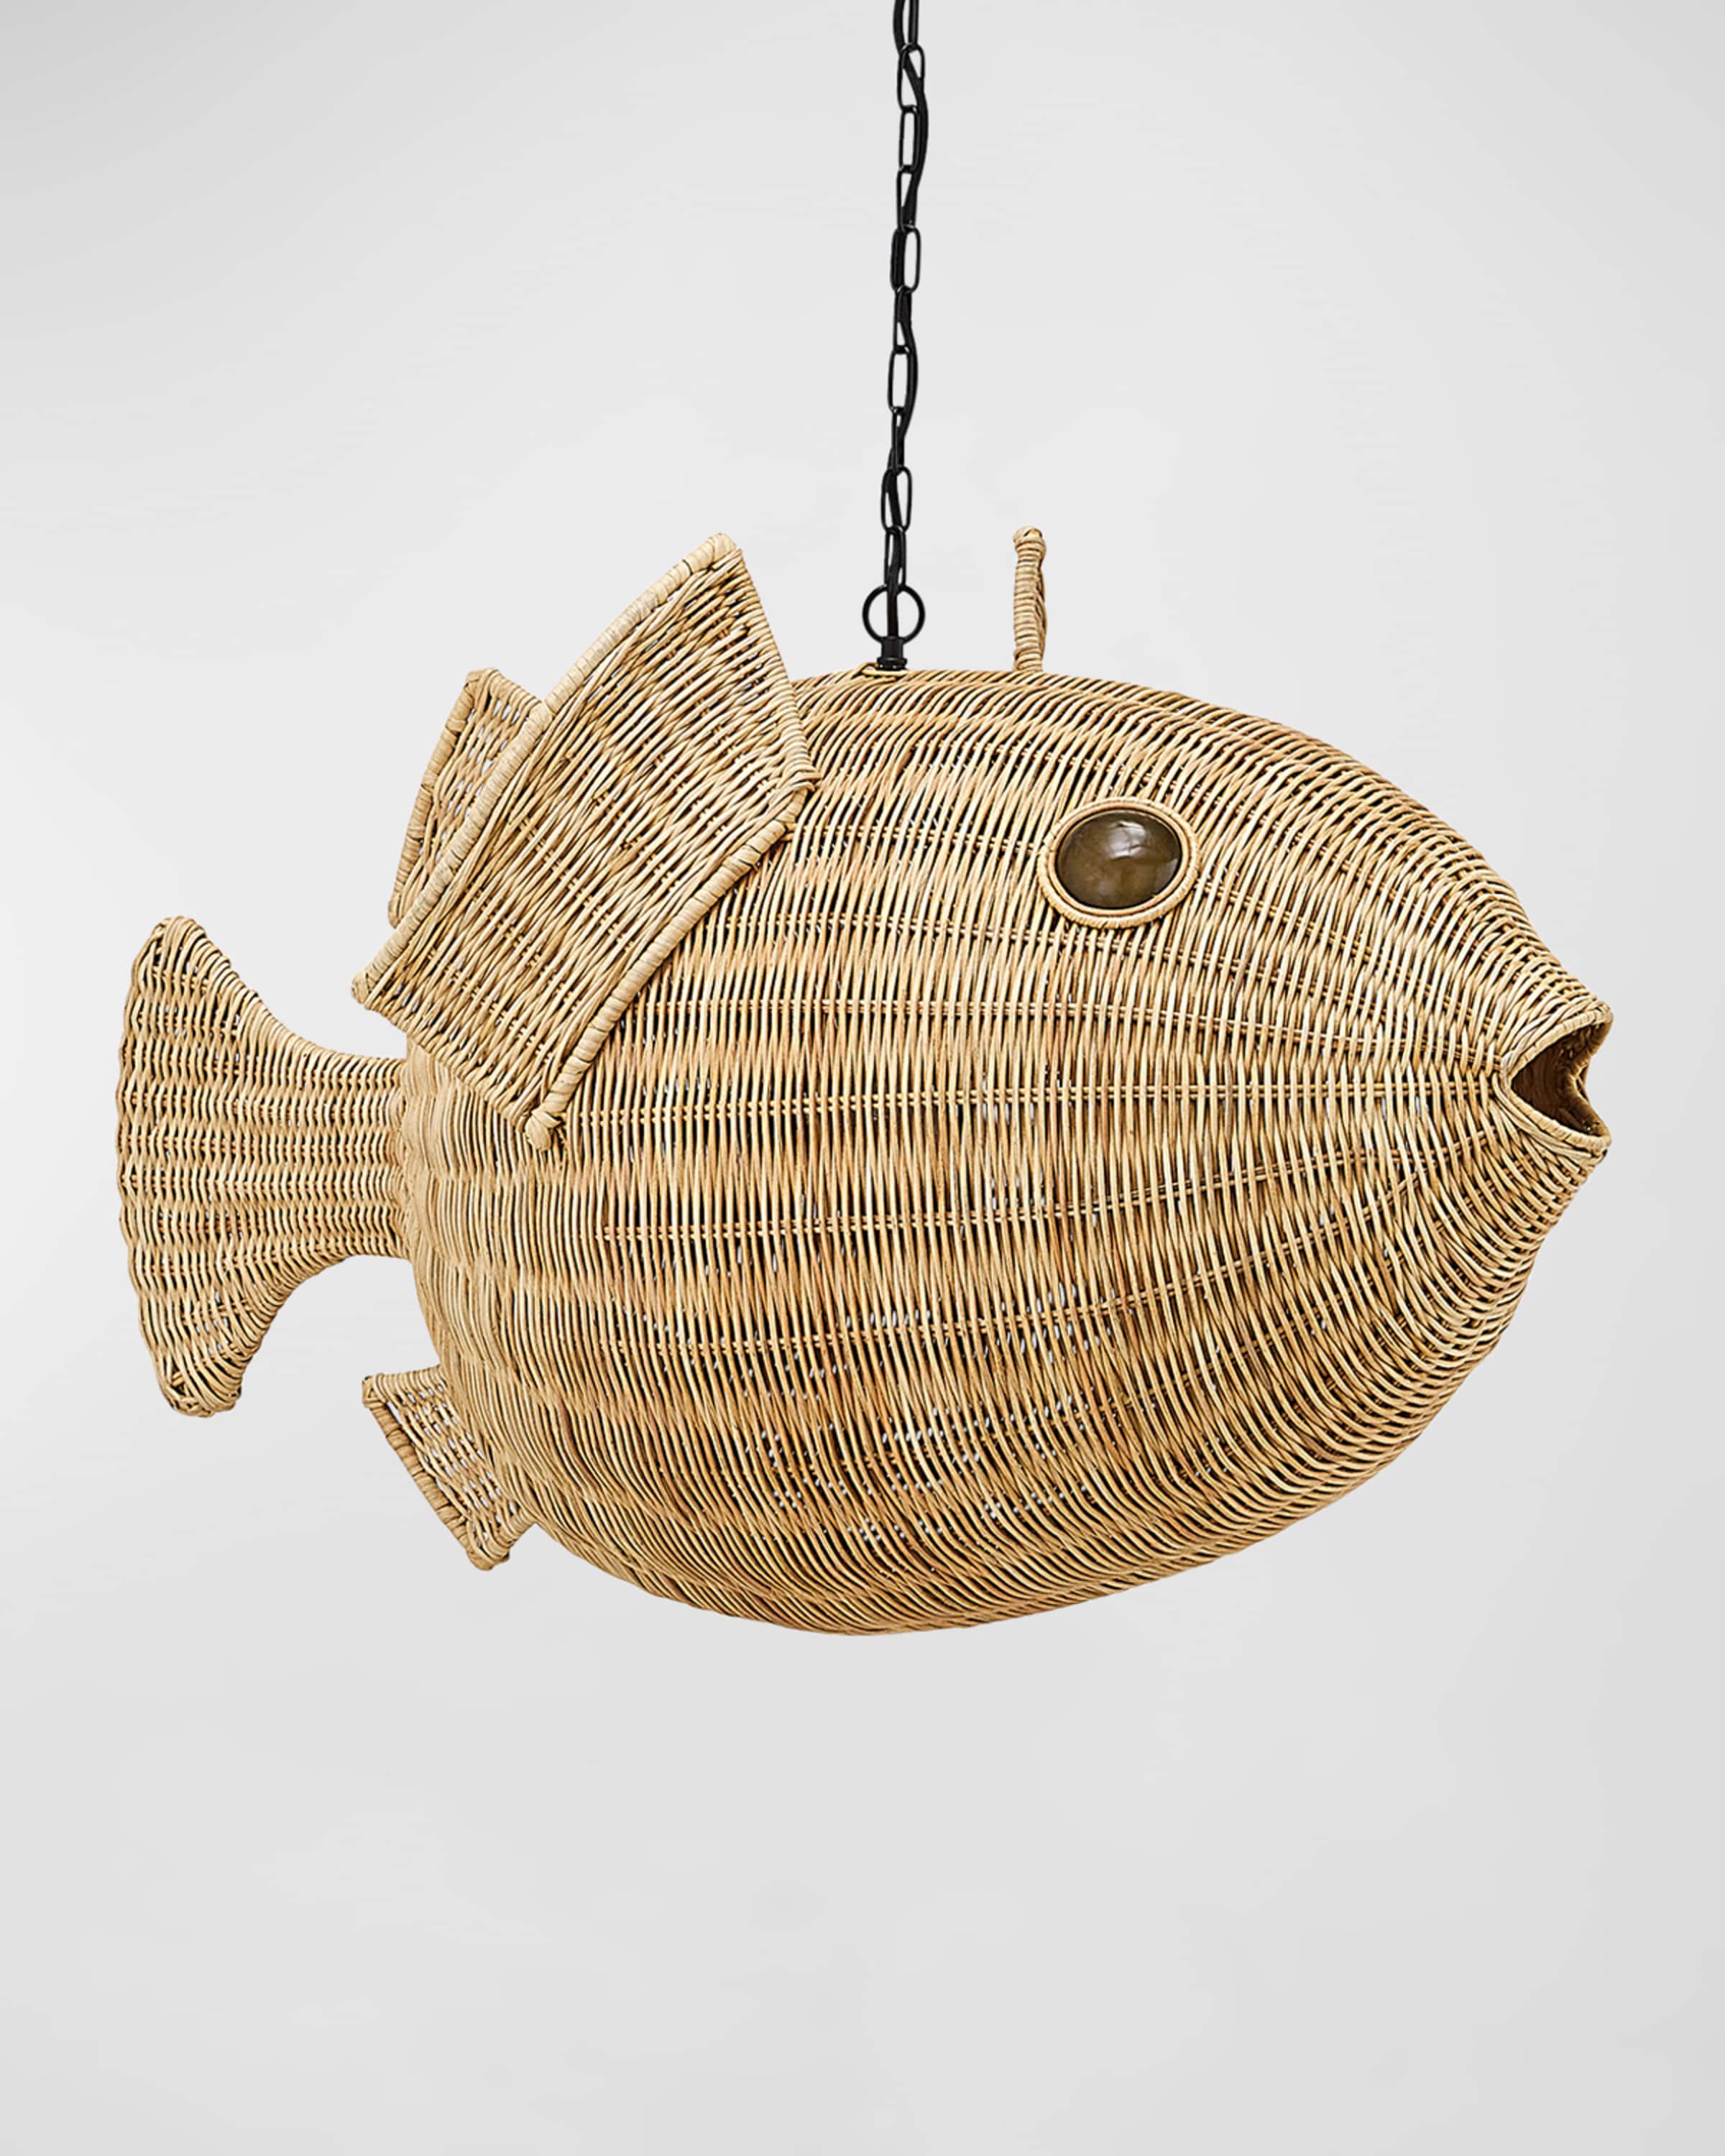 Jonathan Adler Wicker Blow Fish Collection & Matching Items | Horchow